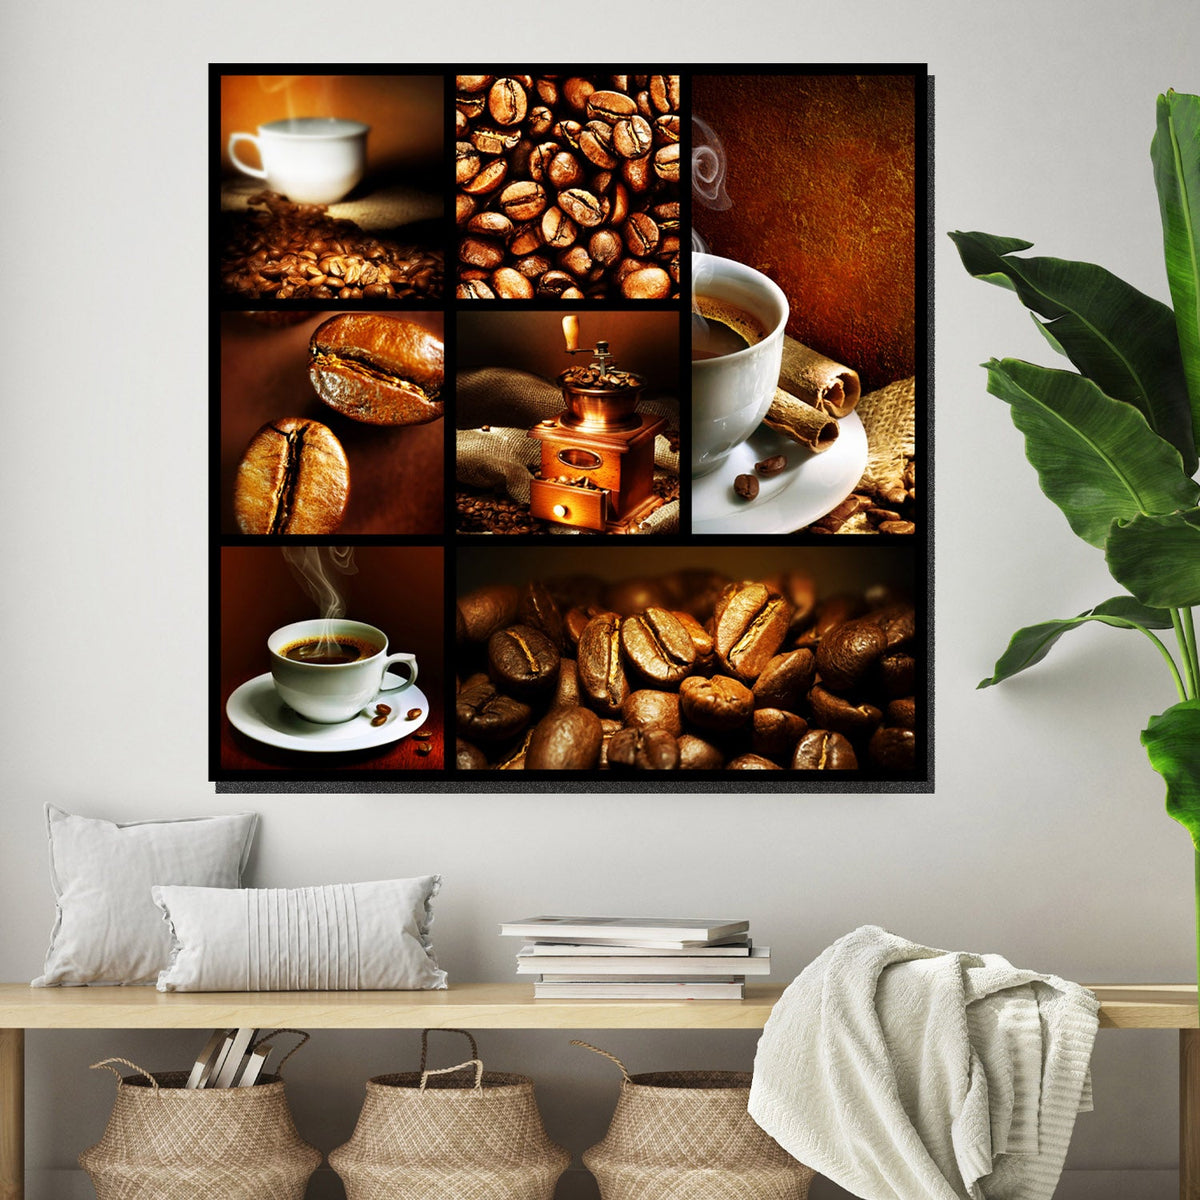 https://cdn.shopify.com/s/files/1/0387/9986/8044/products/CoffeeCollageCanvasArtprintStretched-3.jpg